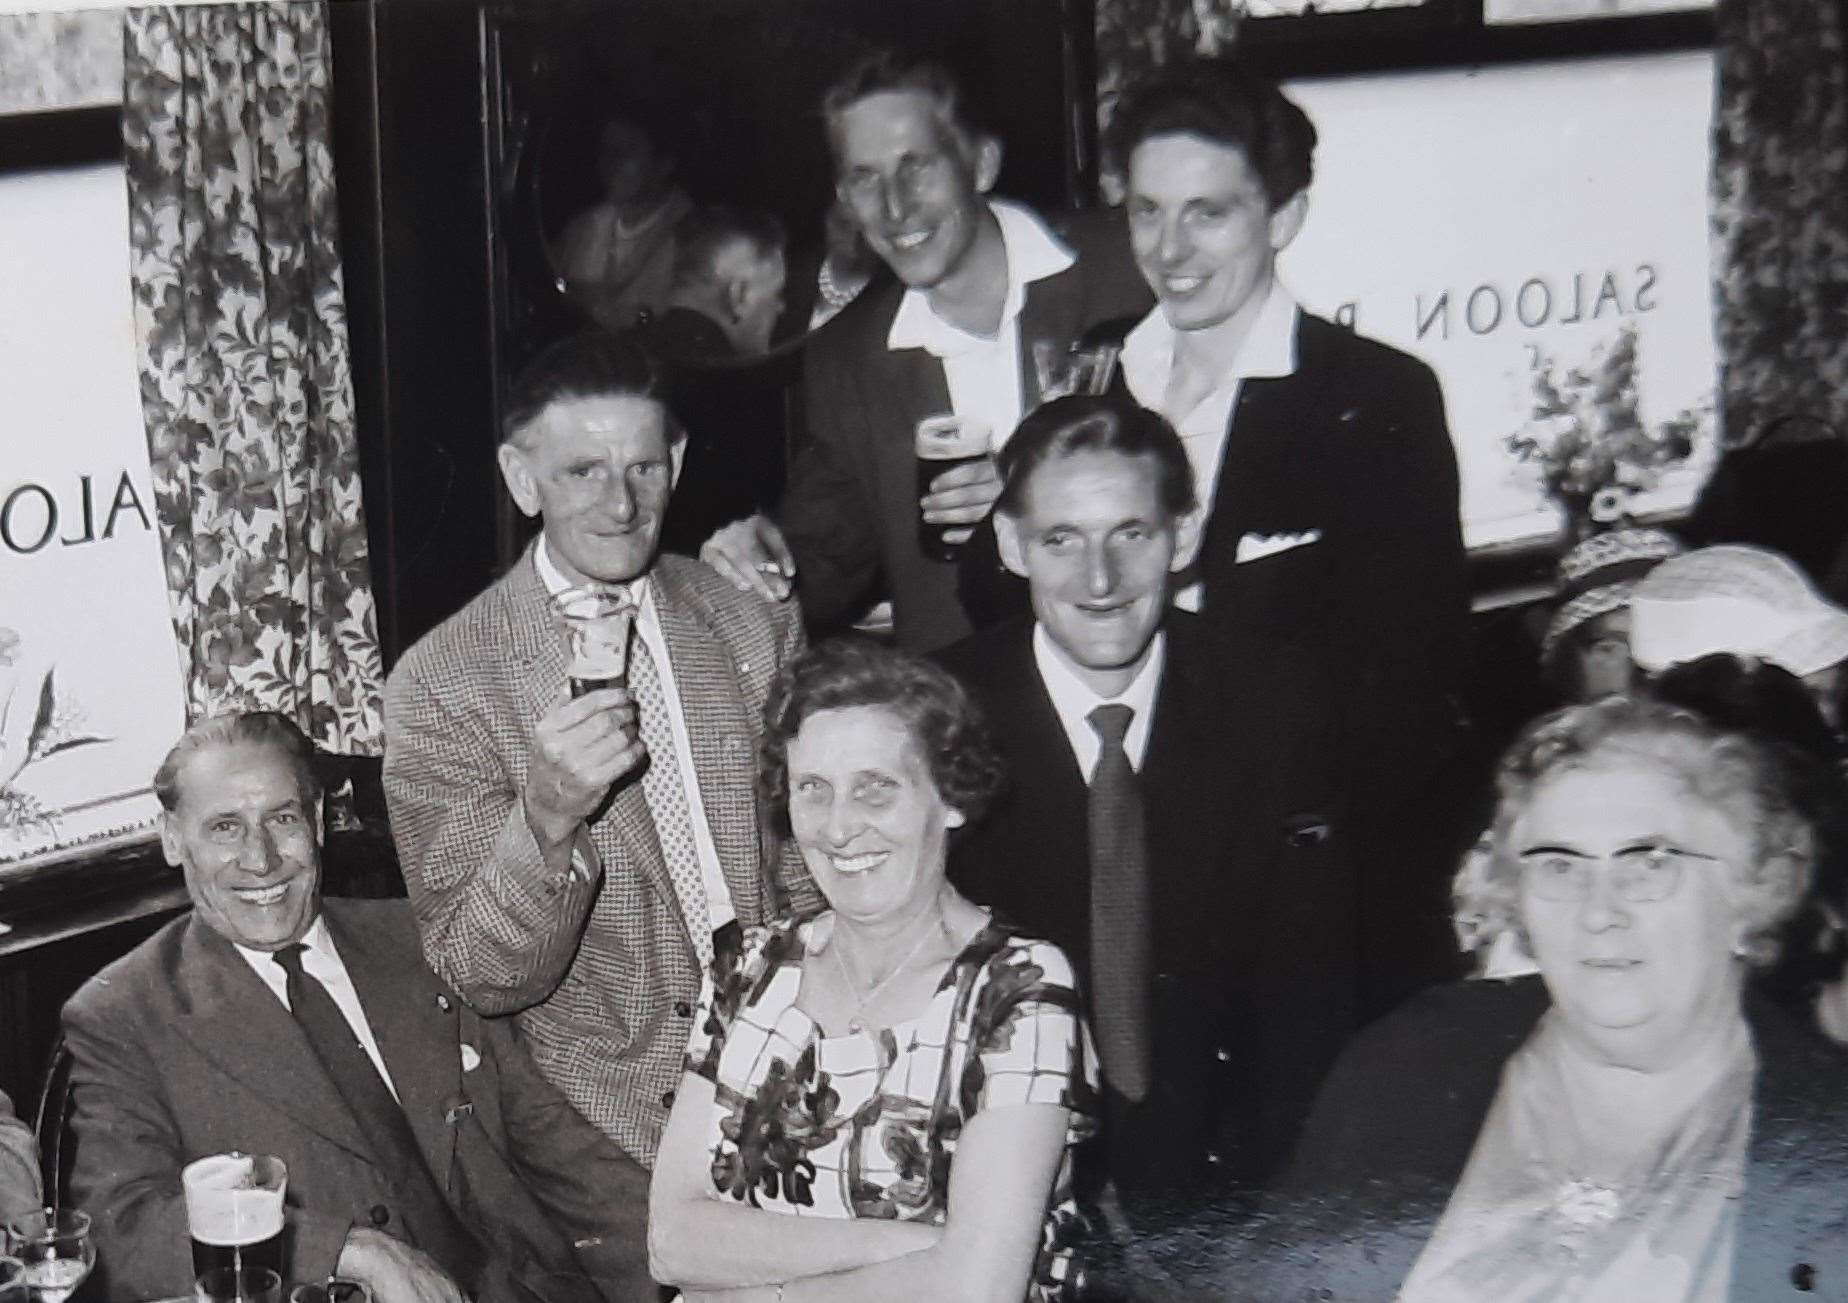 Tony and Bob, pictured at the back, in the Miller's Arms in Canterbury in the 1960s